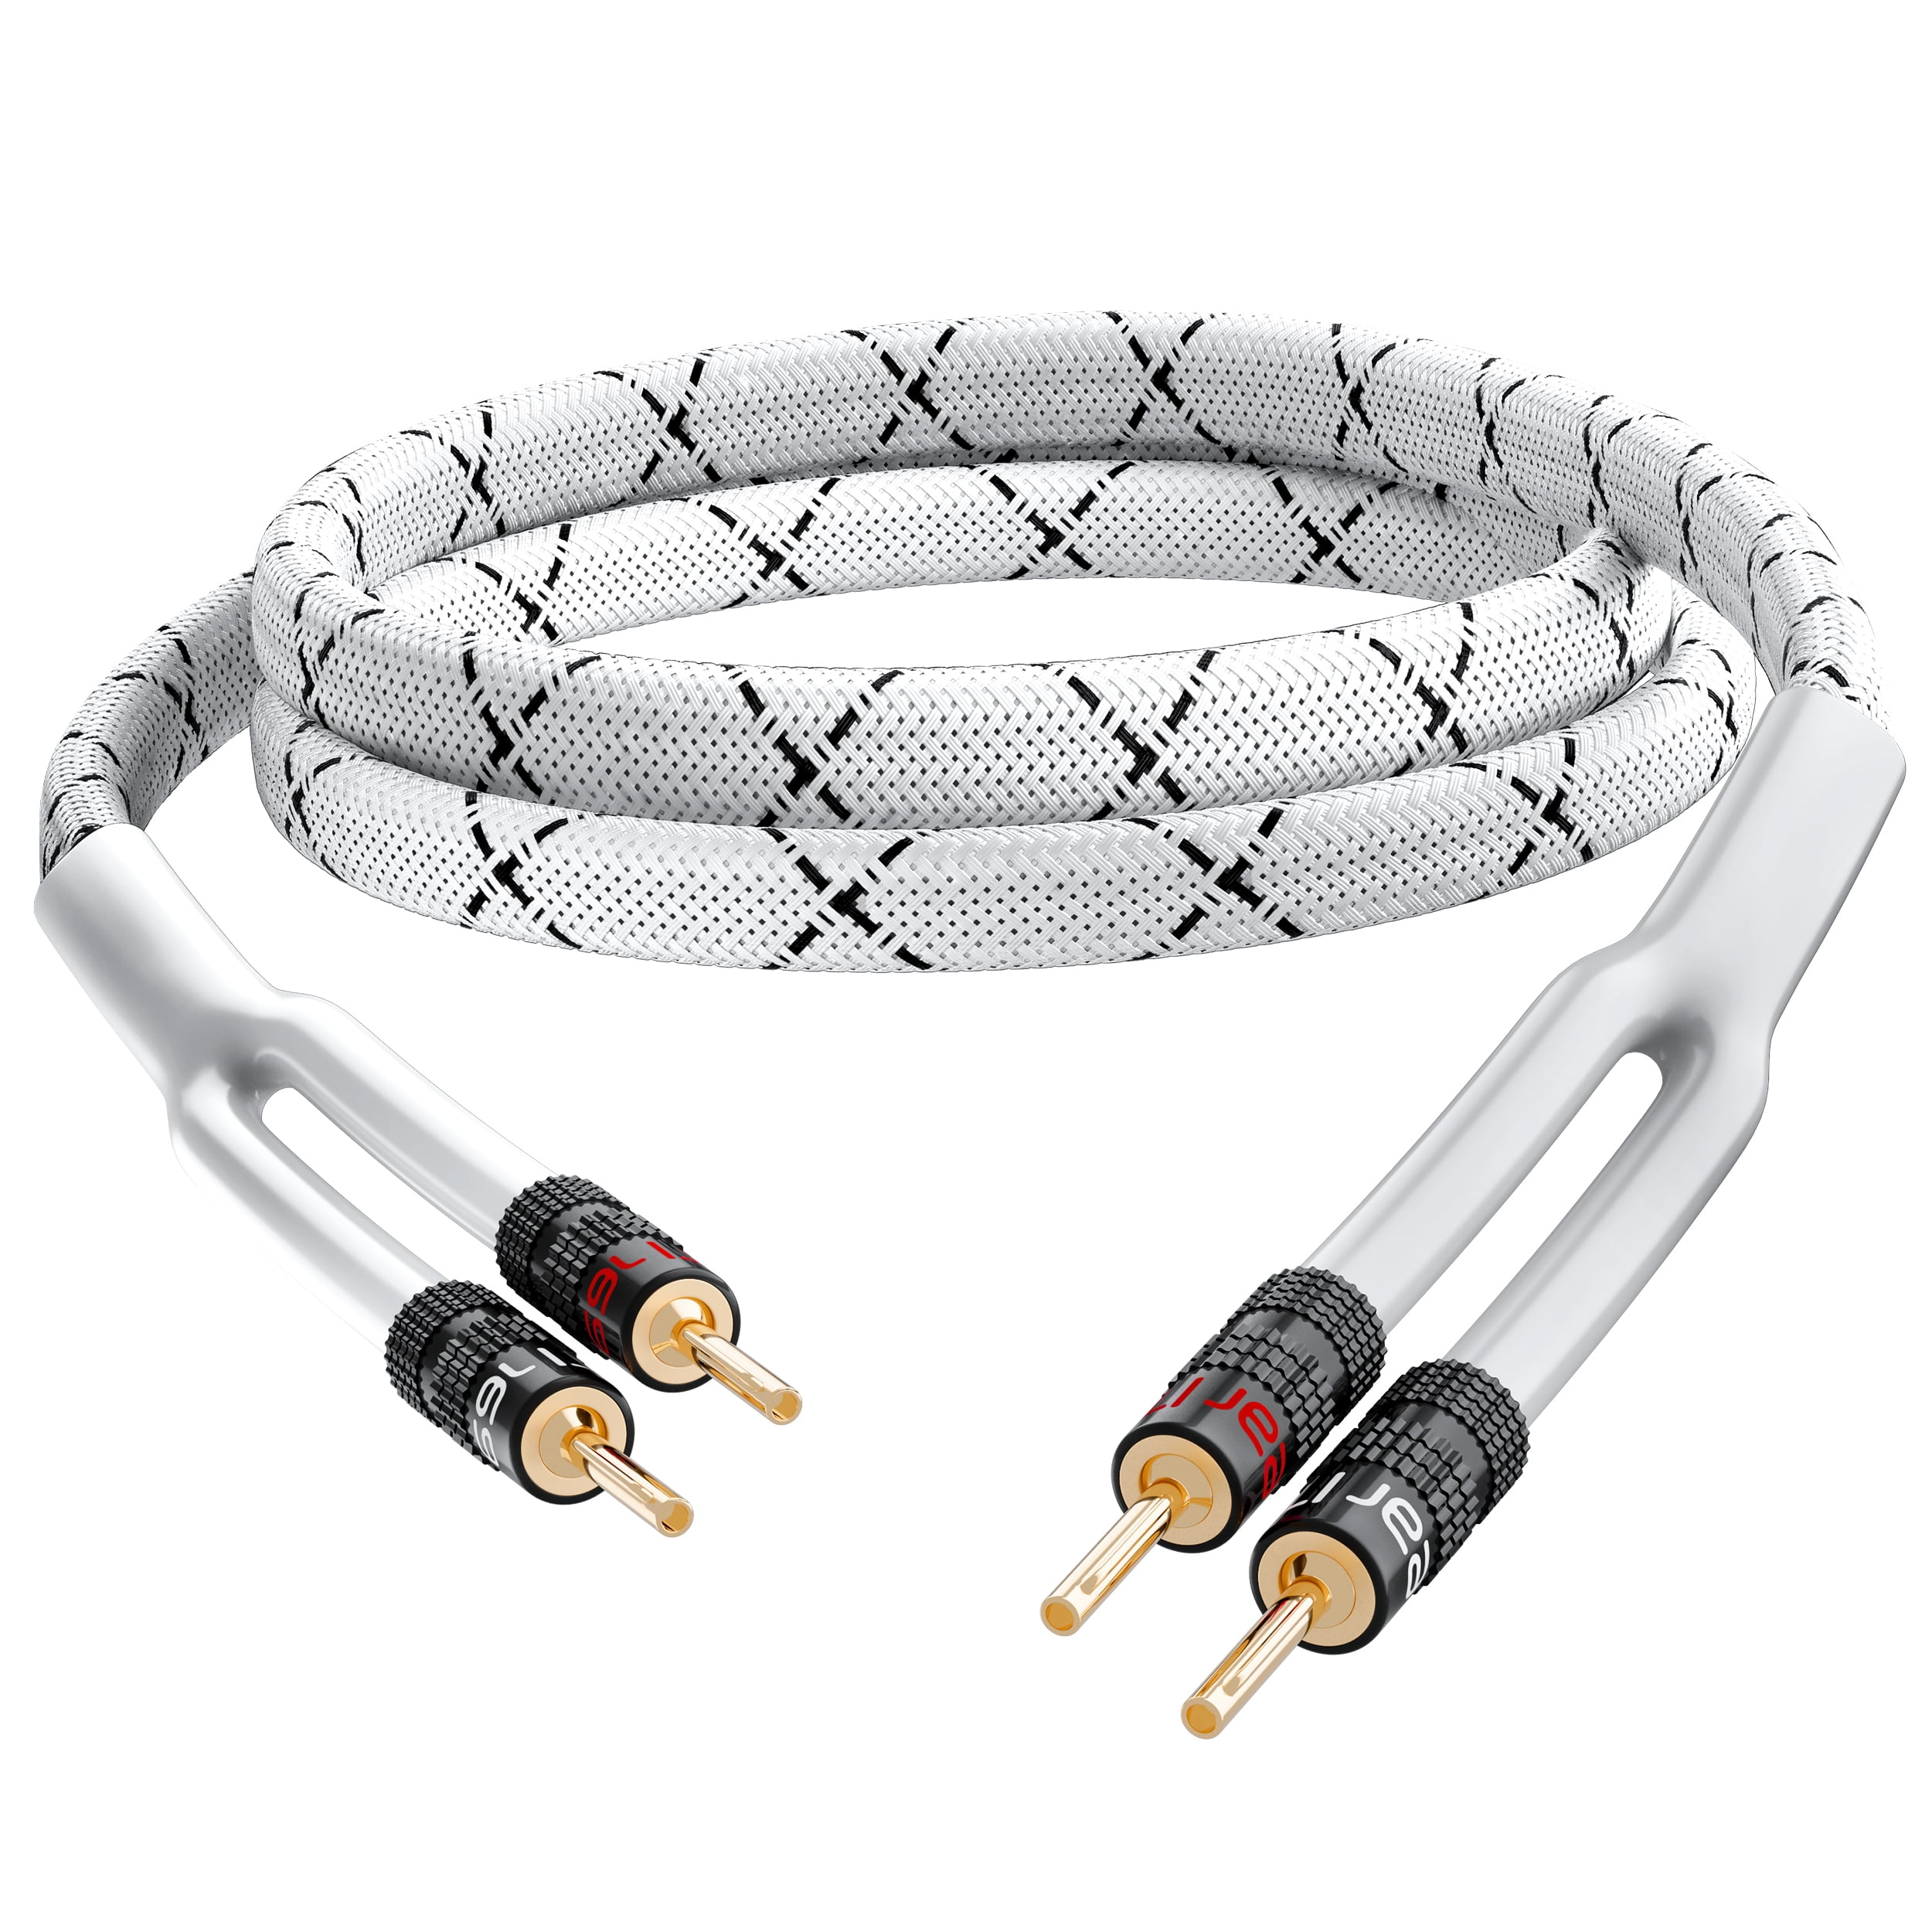 10 Ft 99.9% OFC Copper 14Ga Gauge Banana Wire for Bi-Wire Bi-Amp HiFi Surround Sound Brown GearIT 14 AWG Speaker Cable Wire with Banana Plugs Gold Plated Tips 2 Pack, 9.9 Feet - 3 Meter 